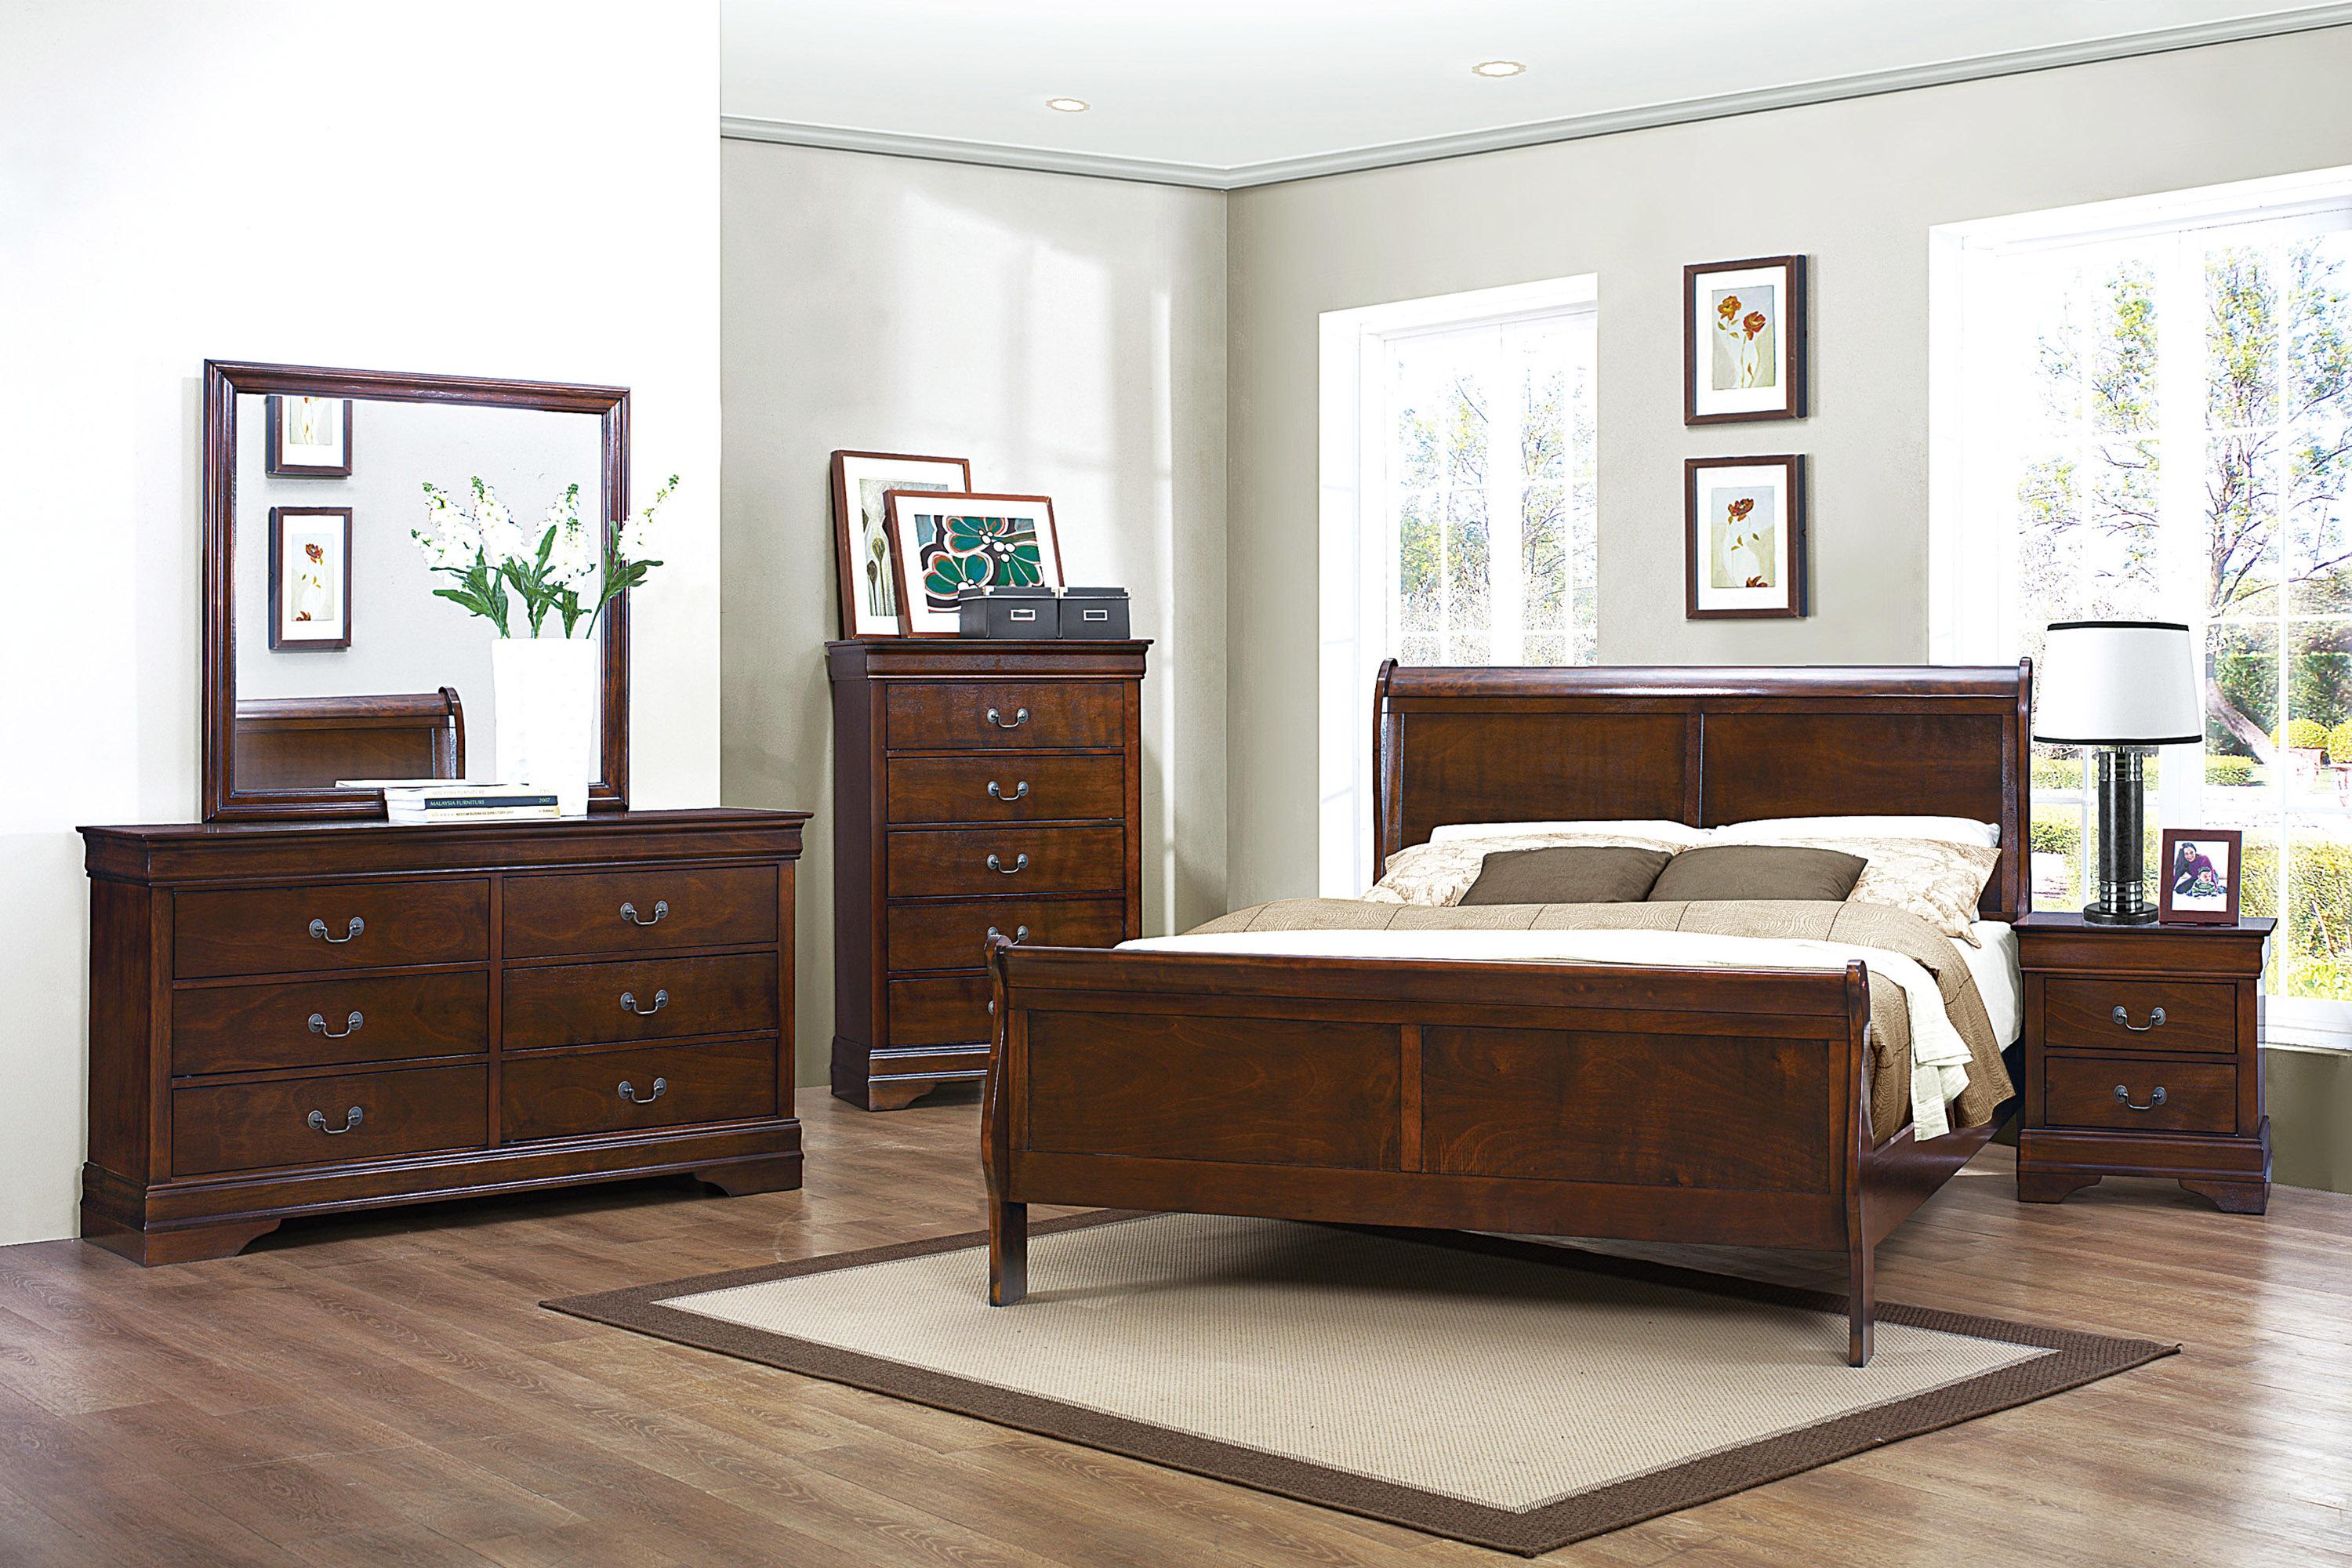 Traditional Bedroom Set 2147-1-6PC Mayville 2147-1-6PC in Cherry 